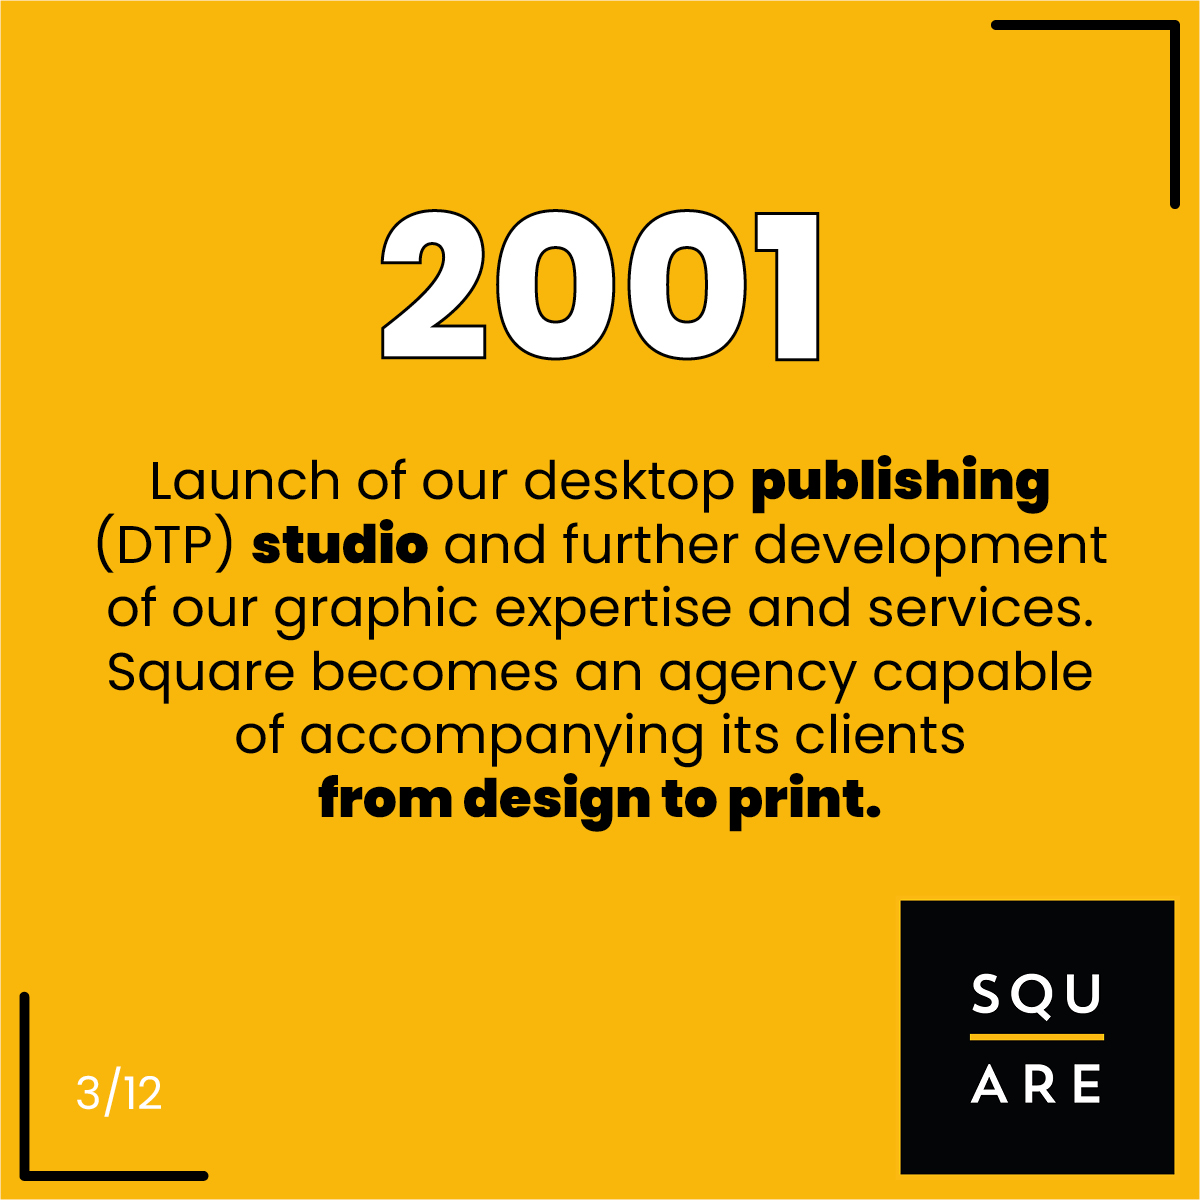 2001, Launch of our desktop publishing (DTP) studio and further development of our graphic expertise and services. Square becomes an agency capable of accompanying its clients from design to print.